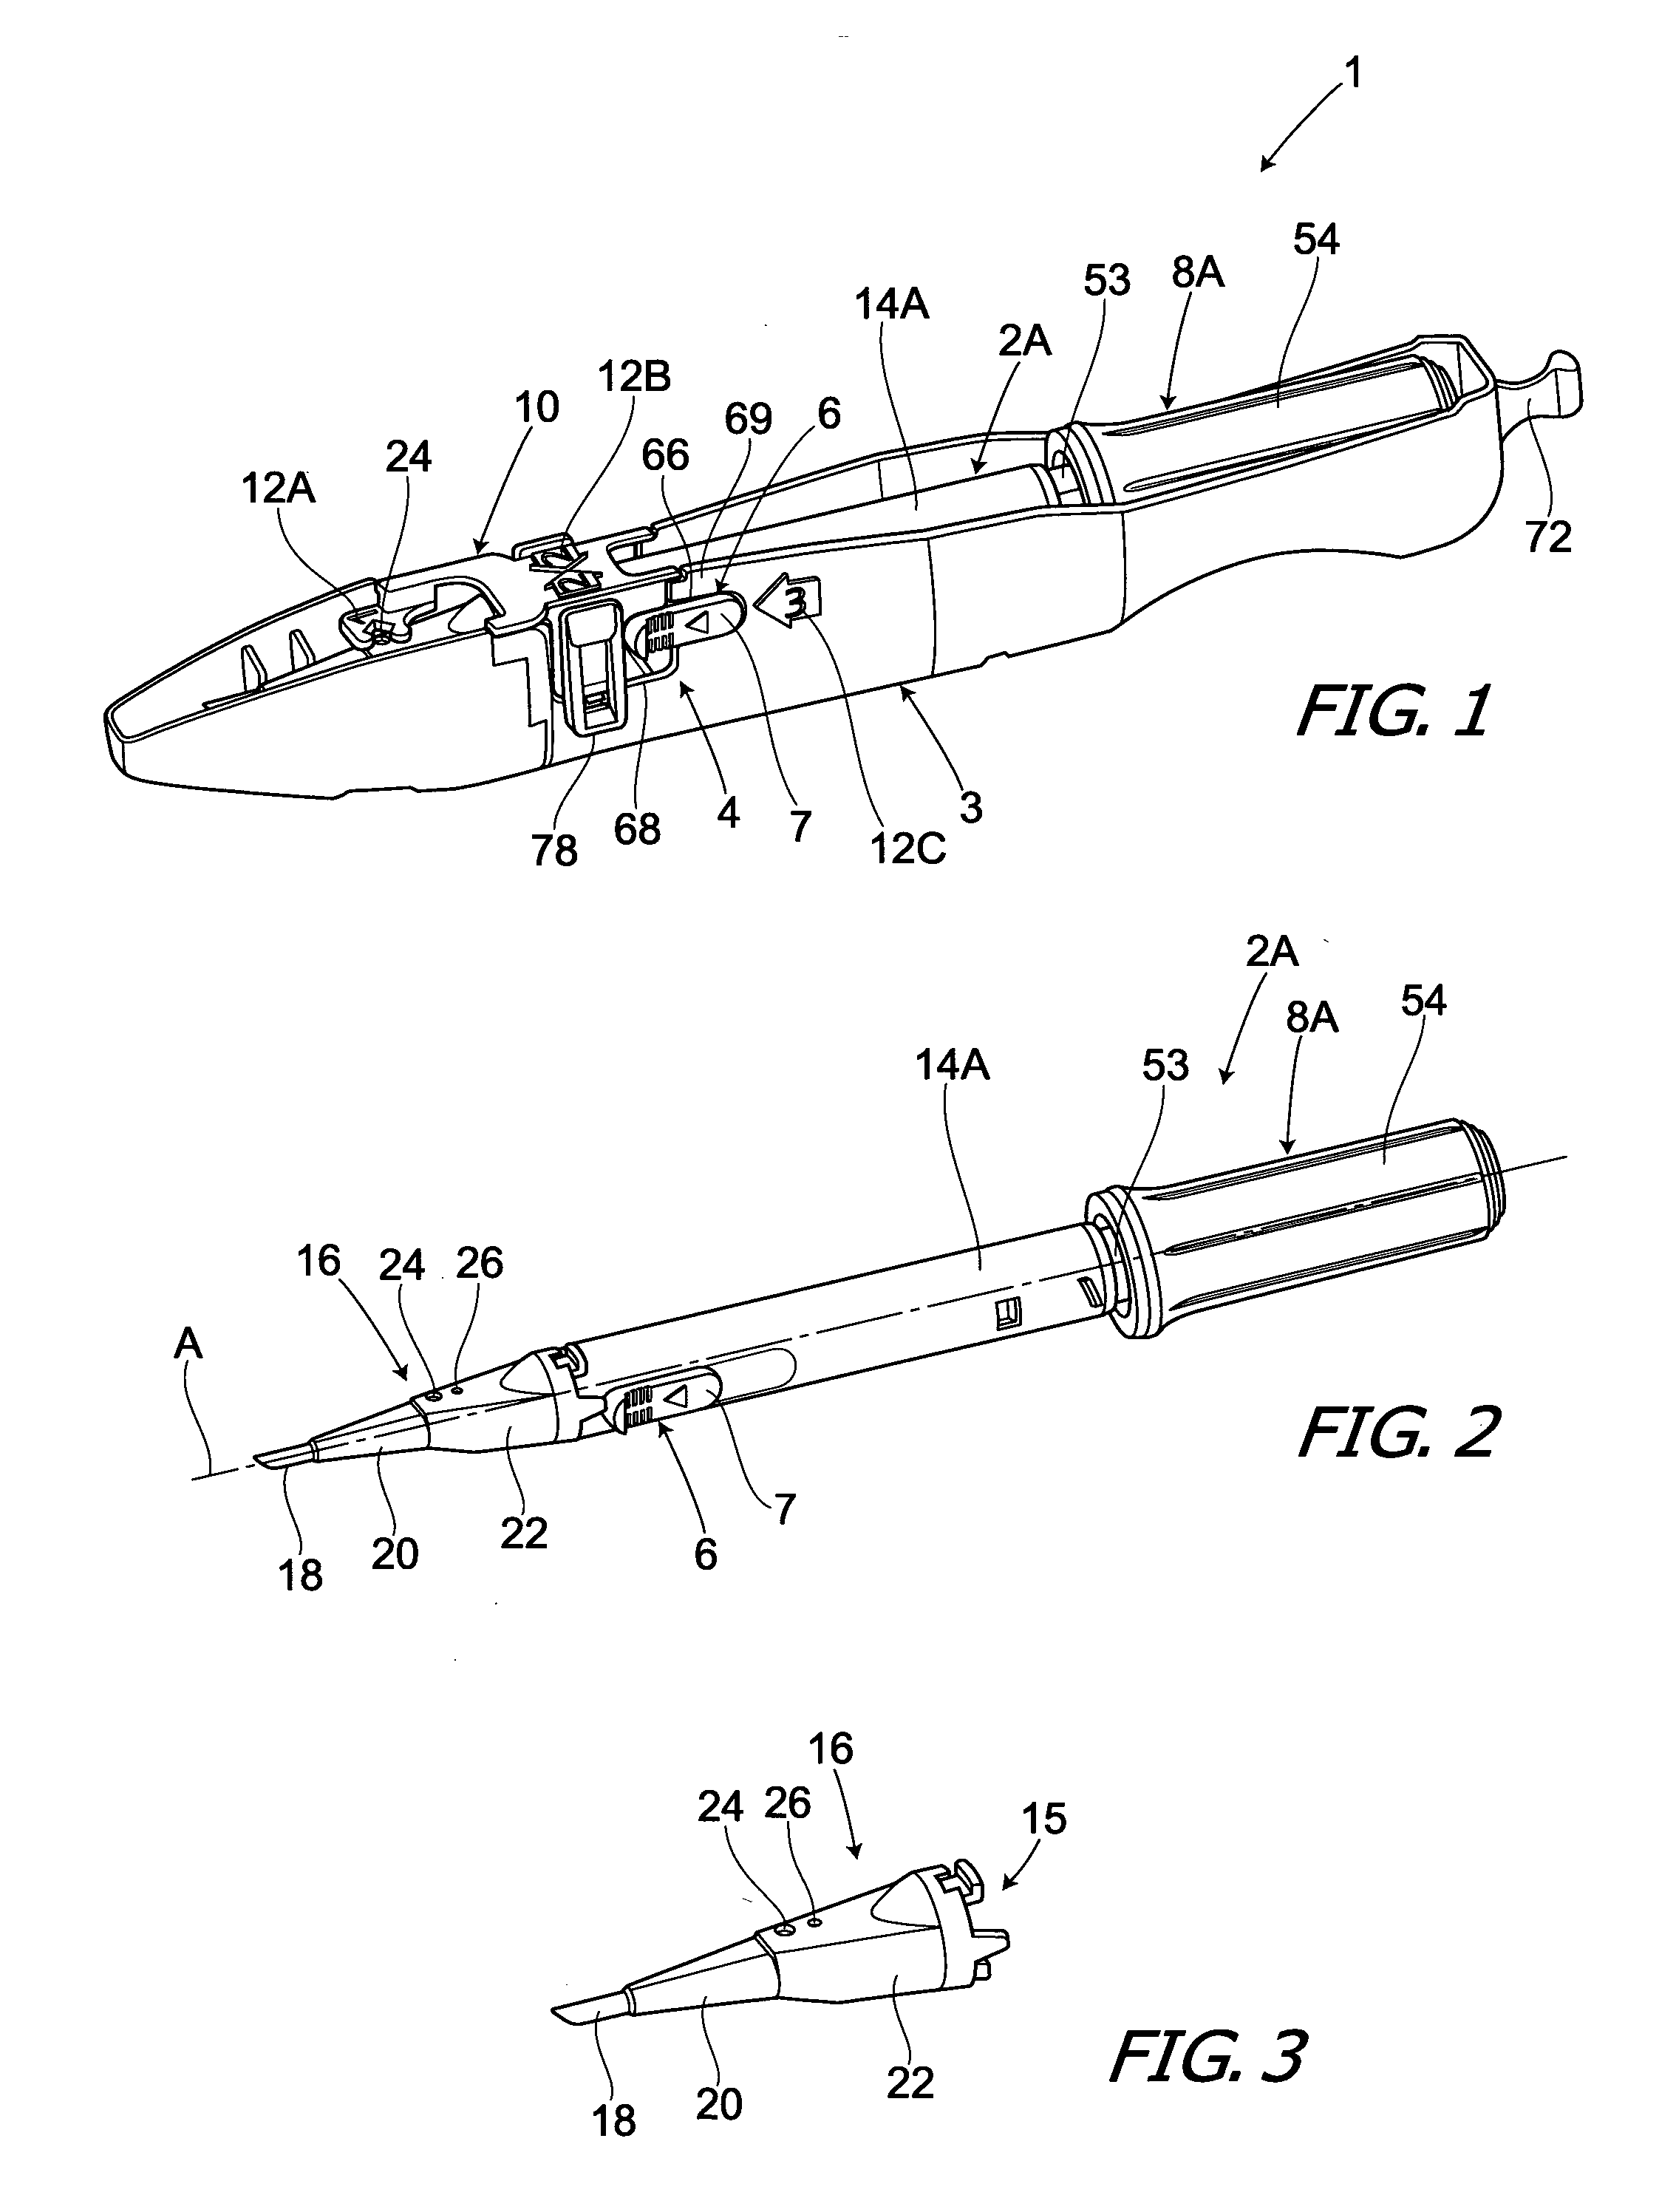 Ocular implant insertion apparatus and methods